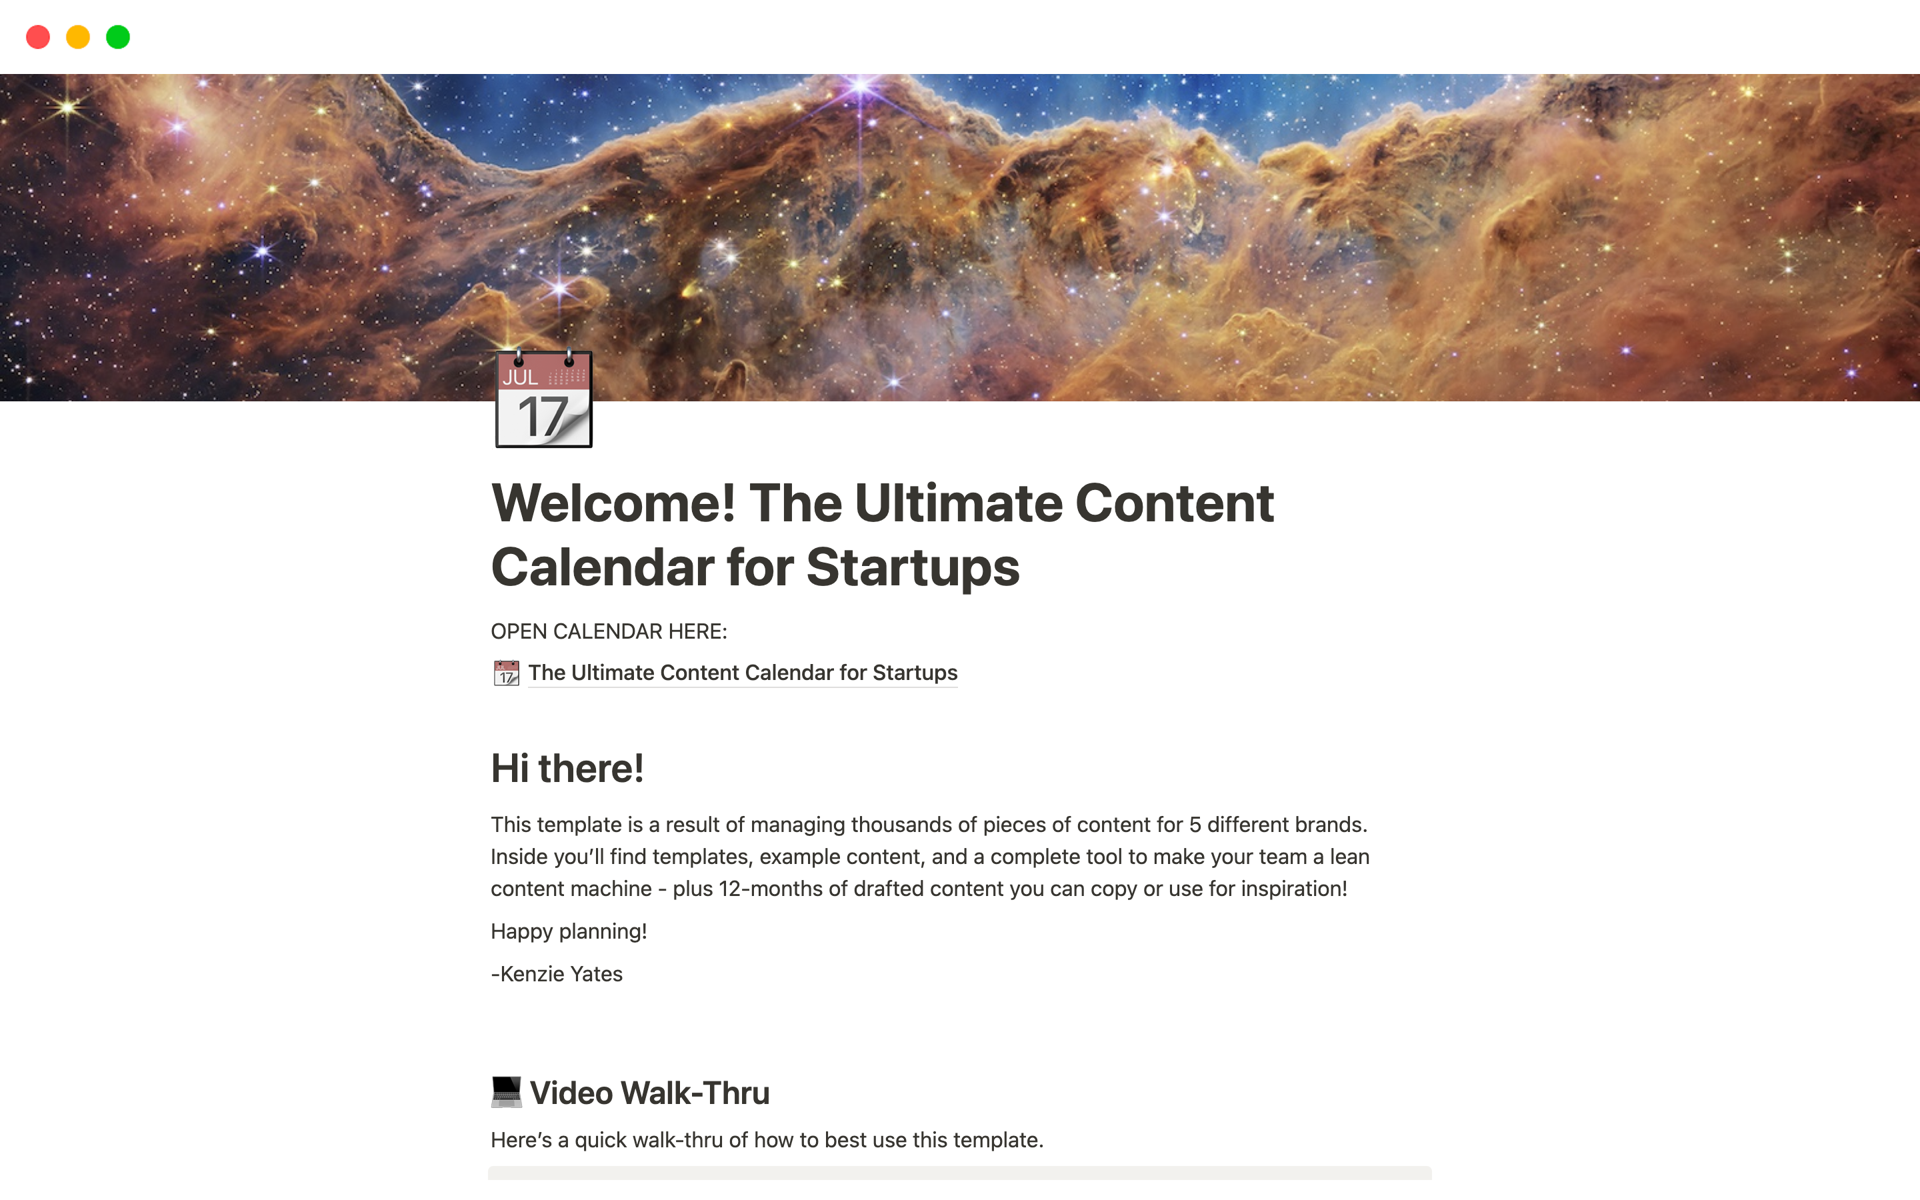 Access the content calendar I've used for 5+ startups and SMBs managing big content loads with small teams.